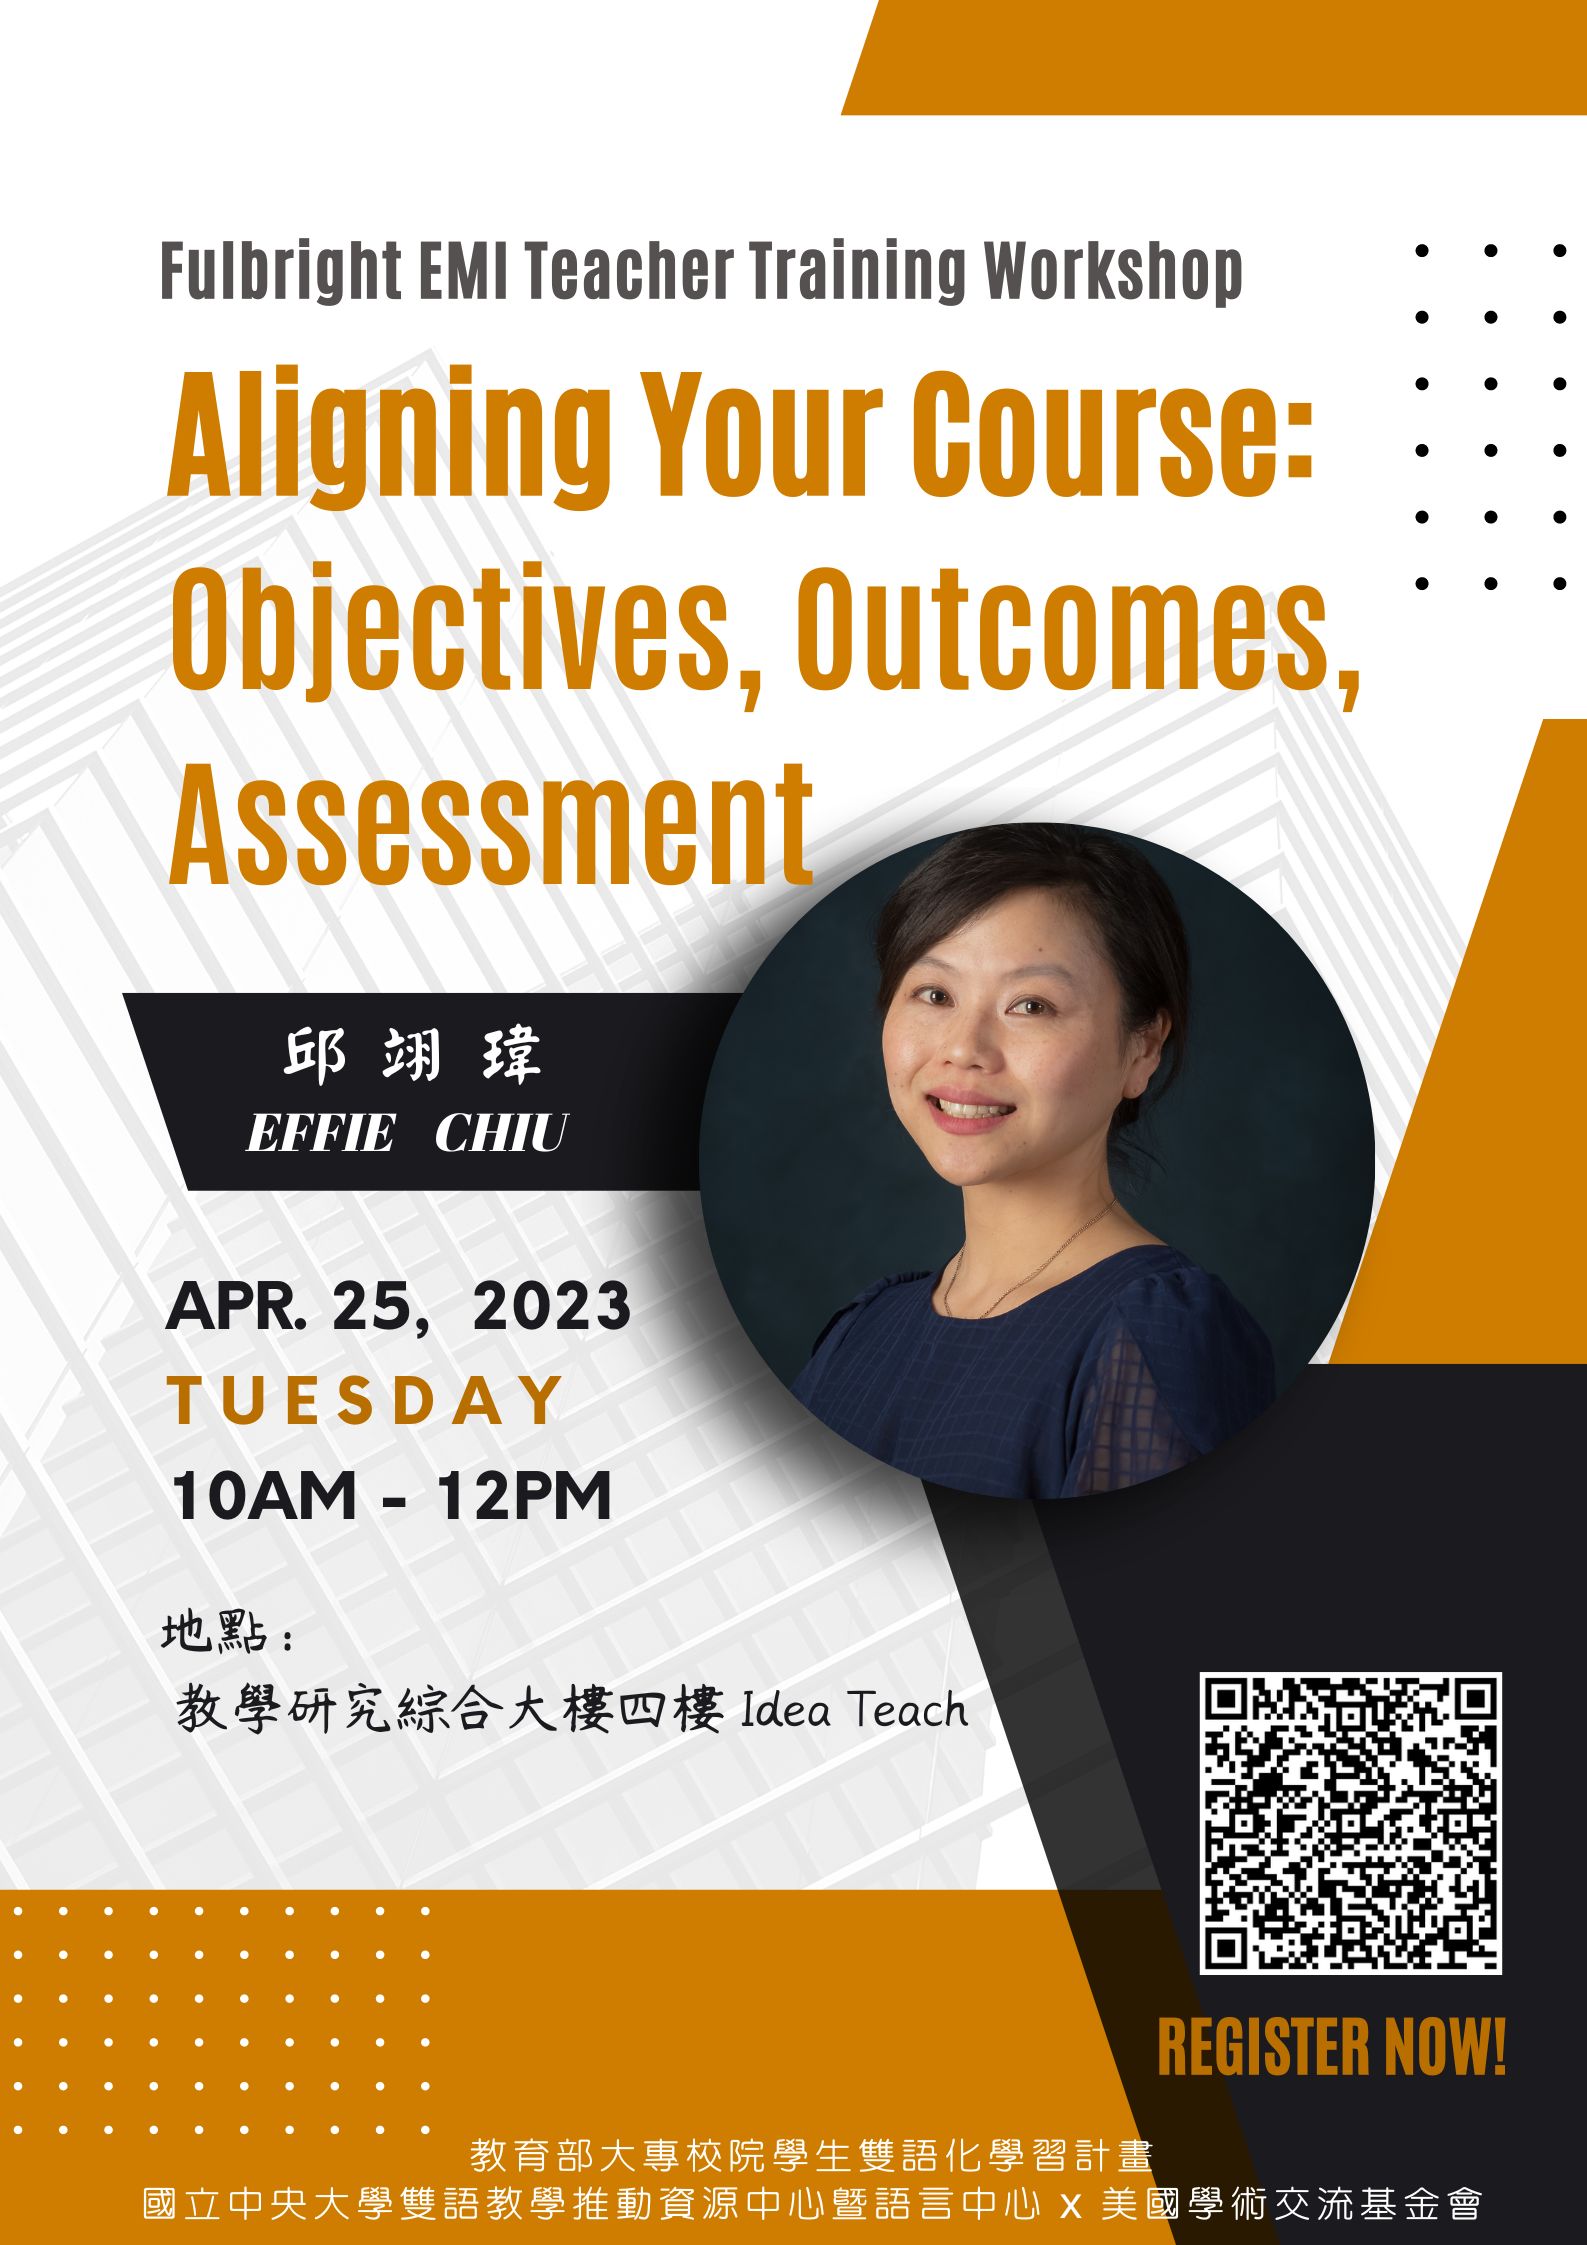 111-2 Semester EMI Teacher Workshop 2 - Aligning Your Course: Objectives, Outcomes, Assessment